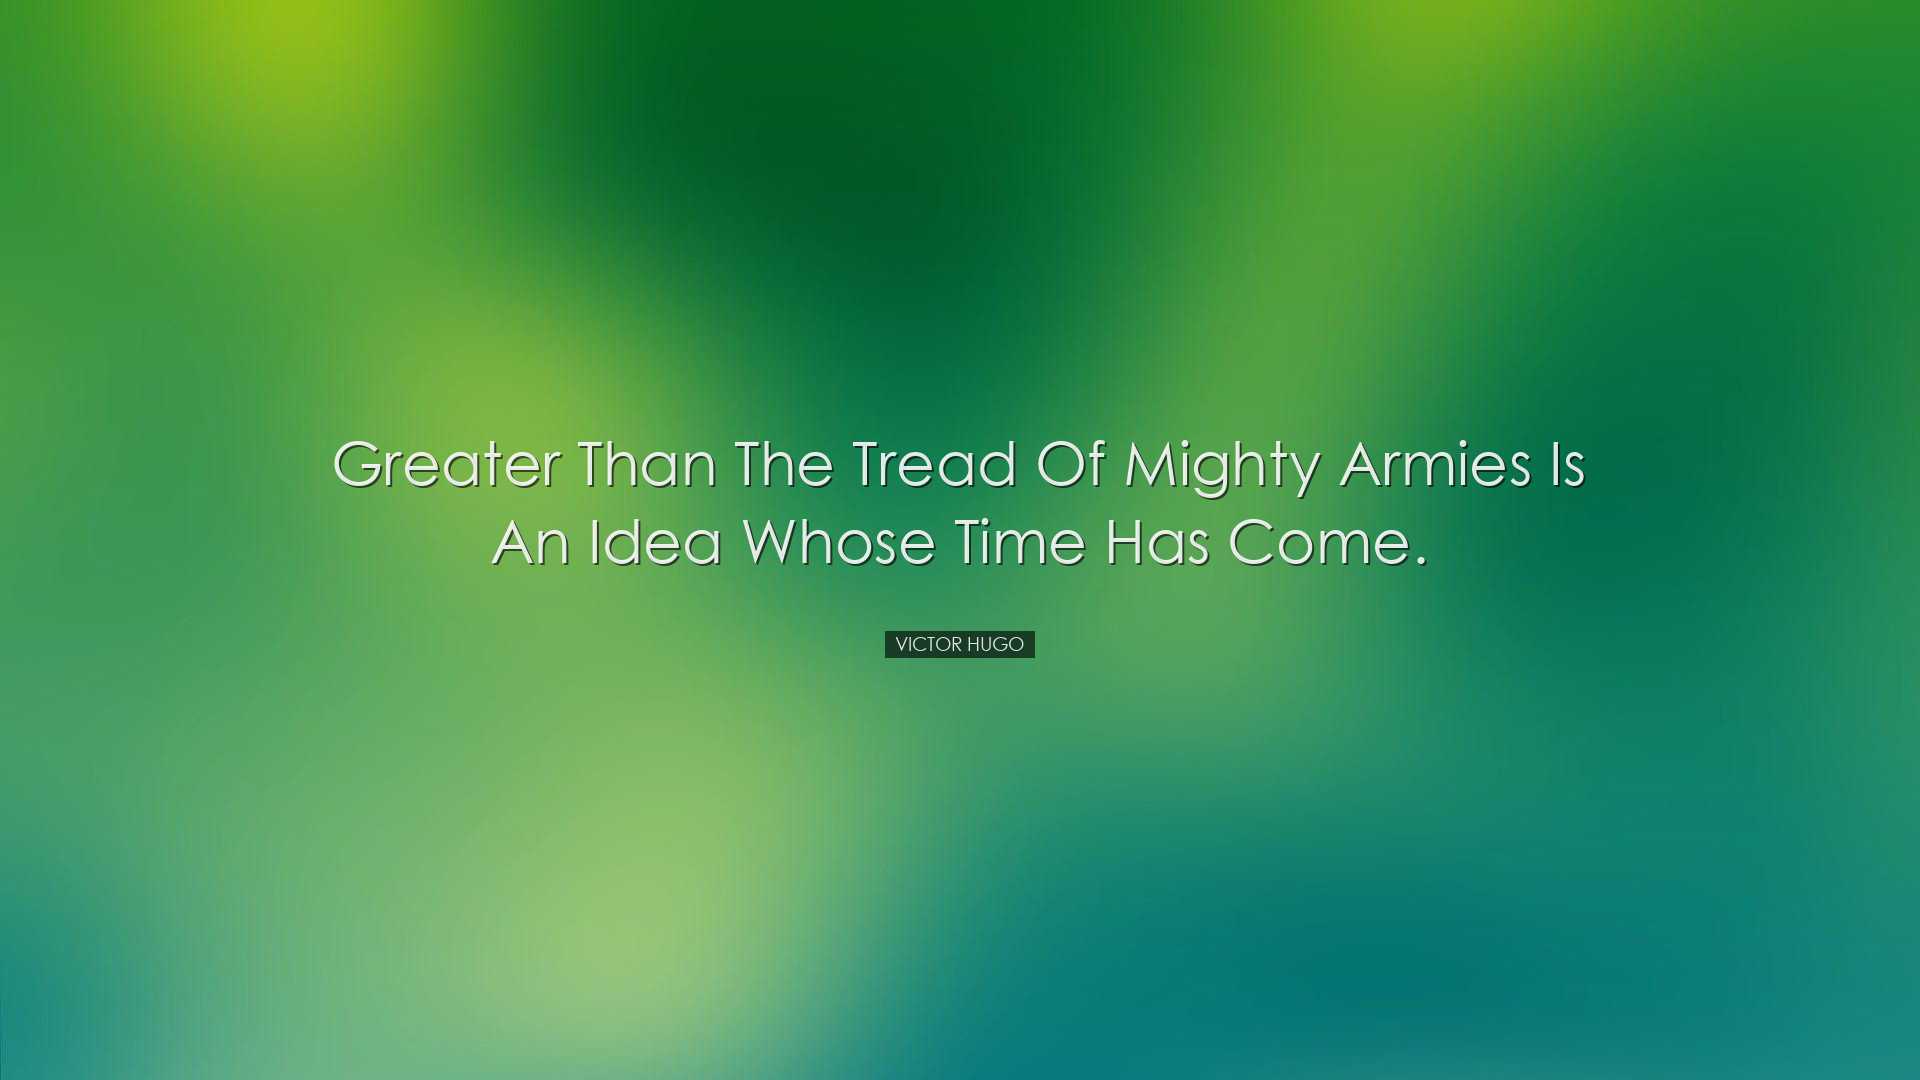 Greater than the tread of mighty armies is an idea whose time has